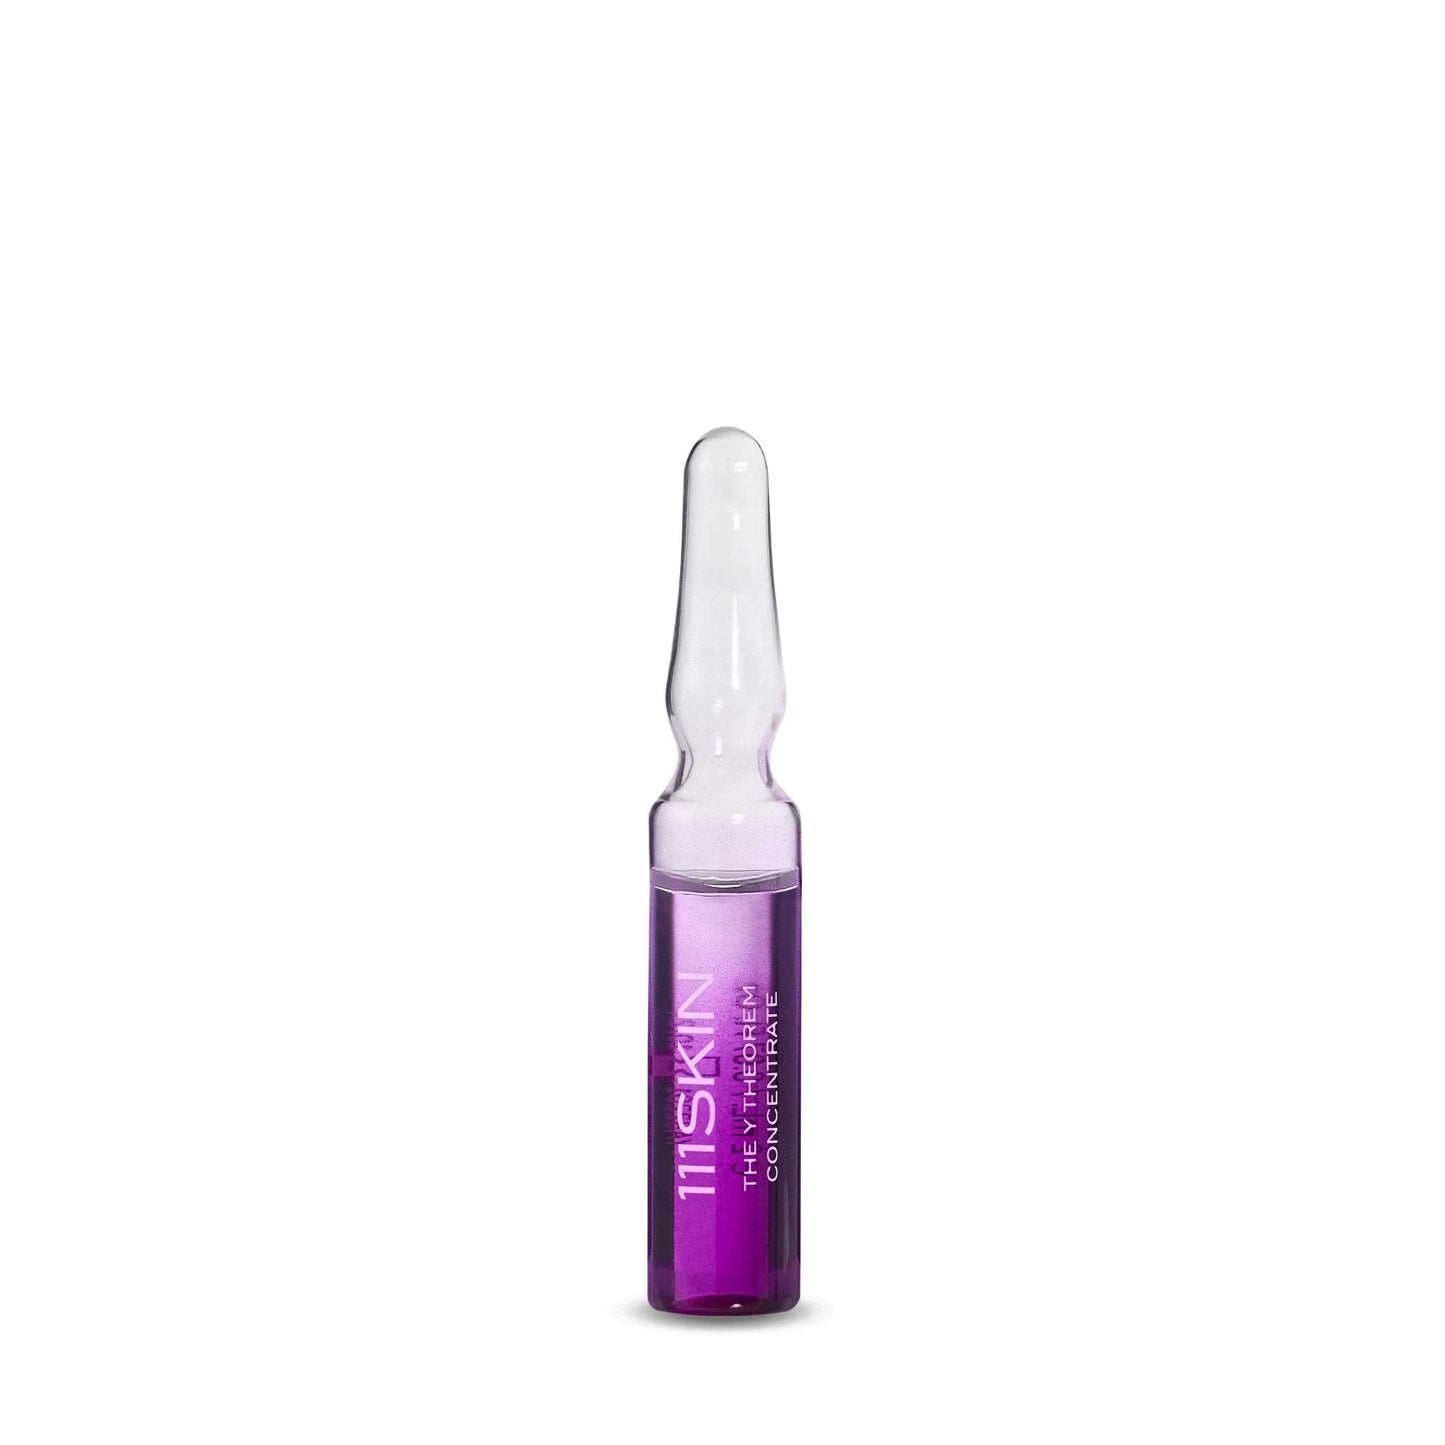 The Y Theorem Concentrate - 111SKIN